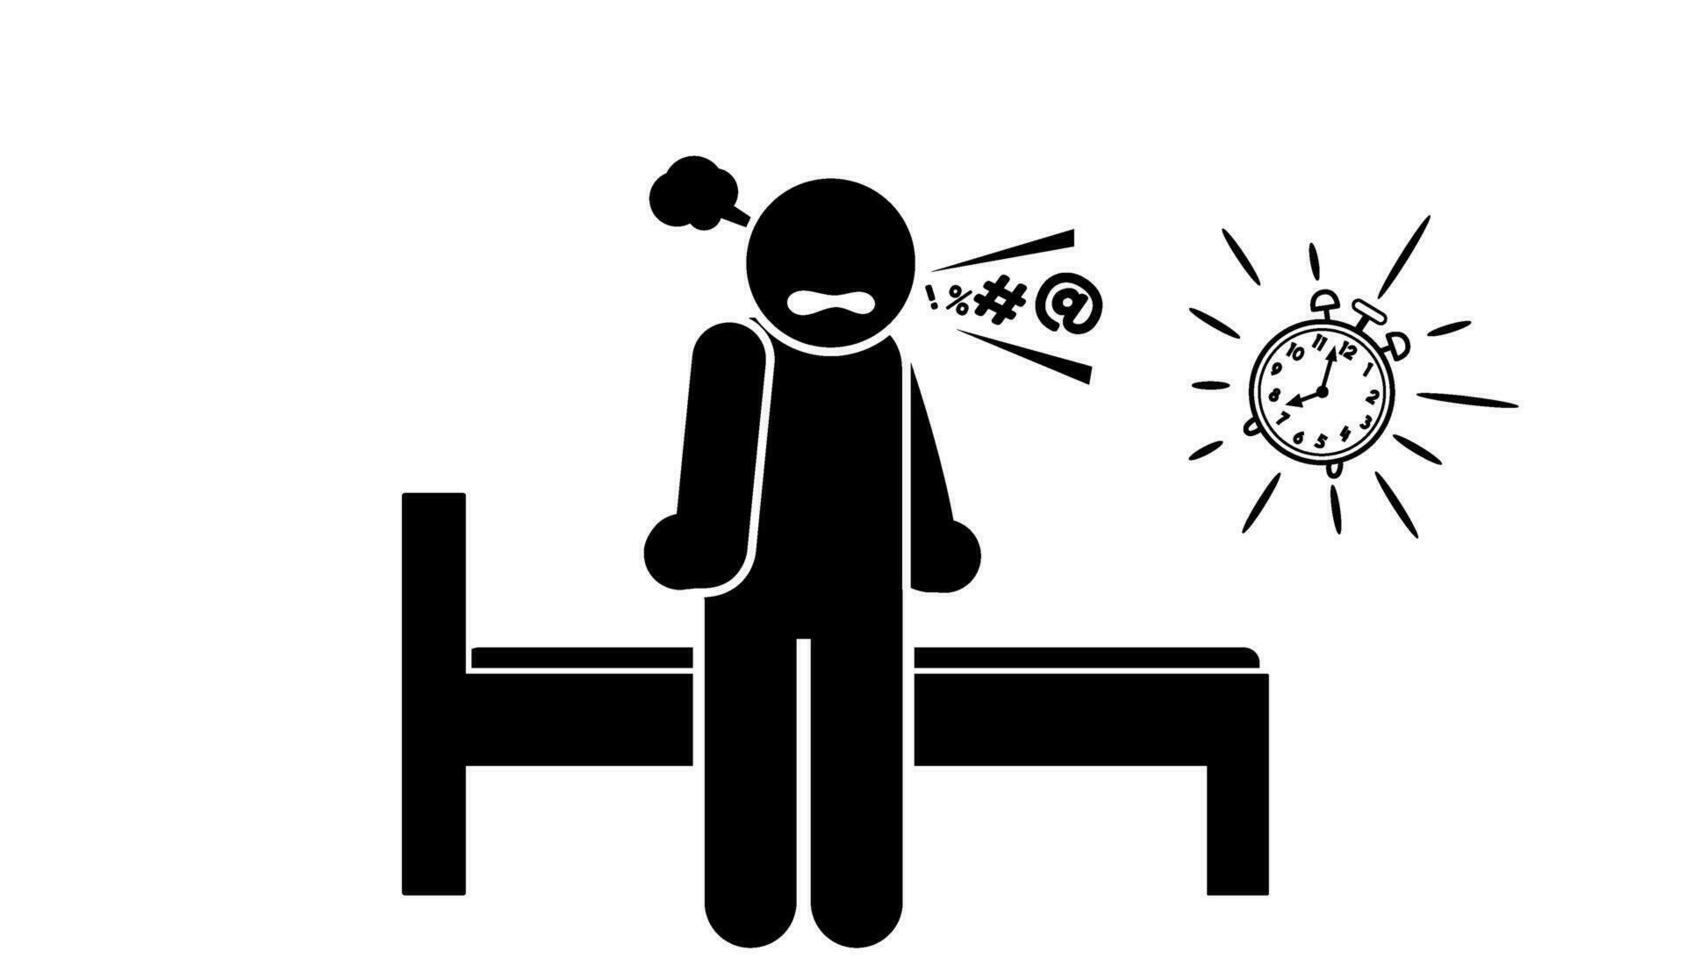 stick figure cartoon vector illustration frustrated, unhappy, unable to sleep due to insomnia